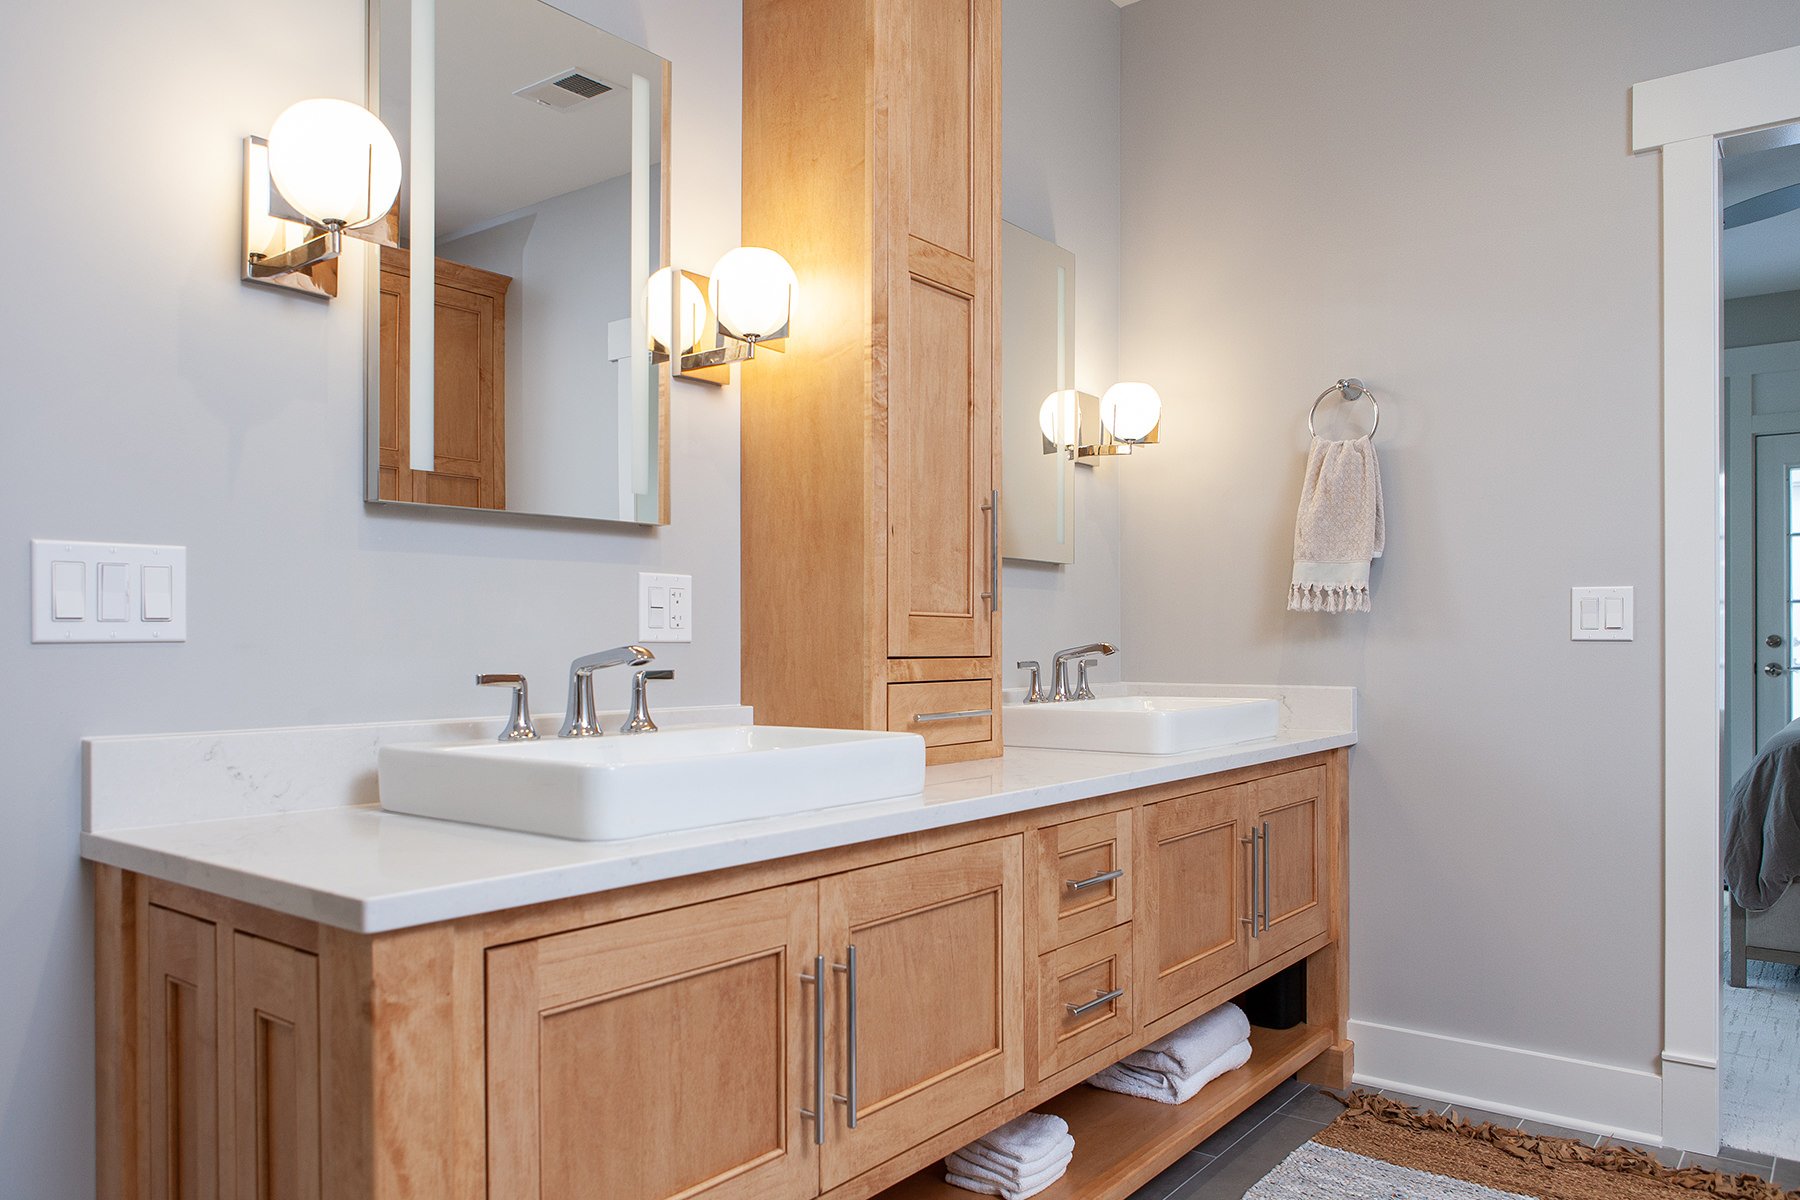 Primary bathroom with double sinks, champagne bronze hardware, white countertops and gold wall sconces. 